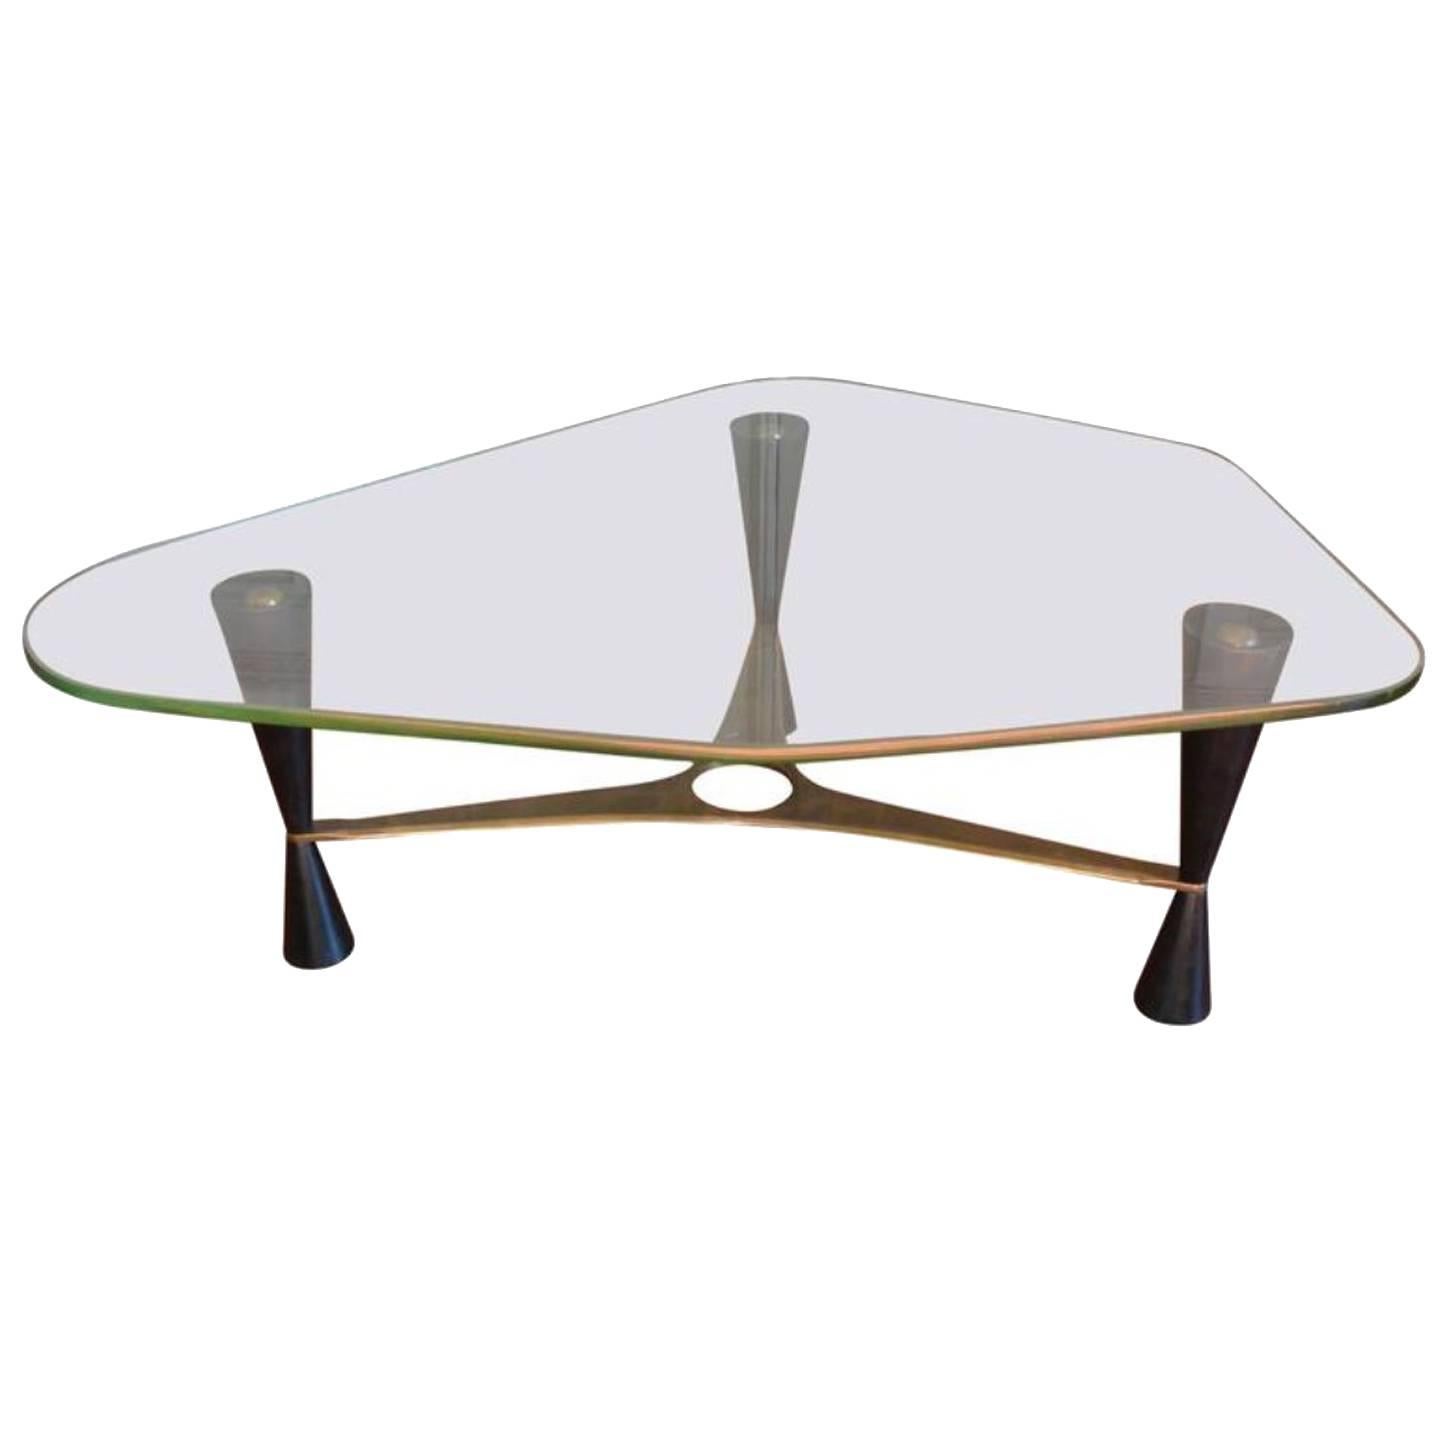 Edward Wormley, Coffee Table 5309 in Lacquered Black Wood, Brass and Glass